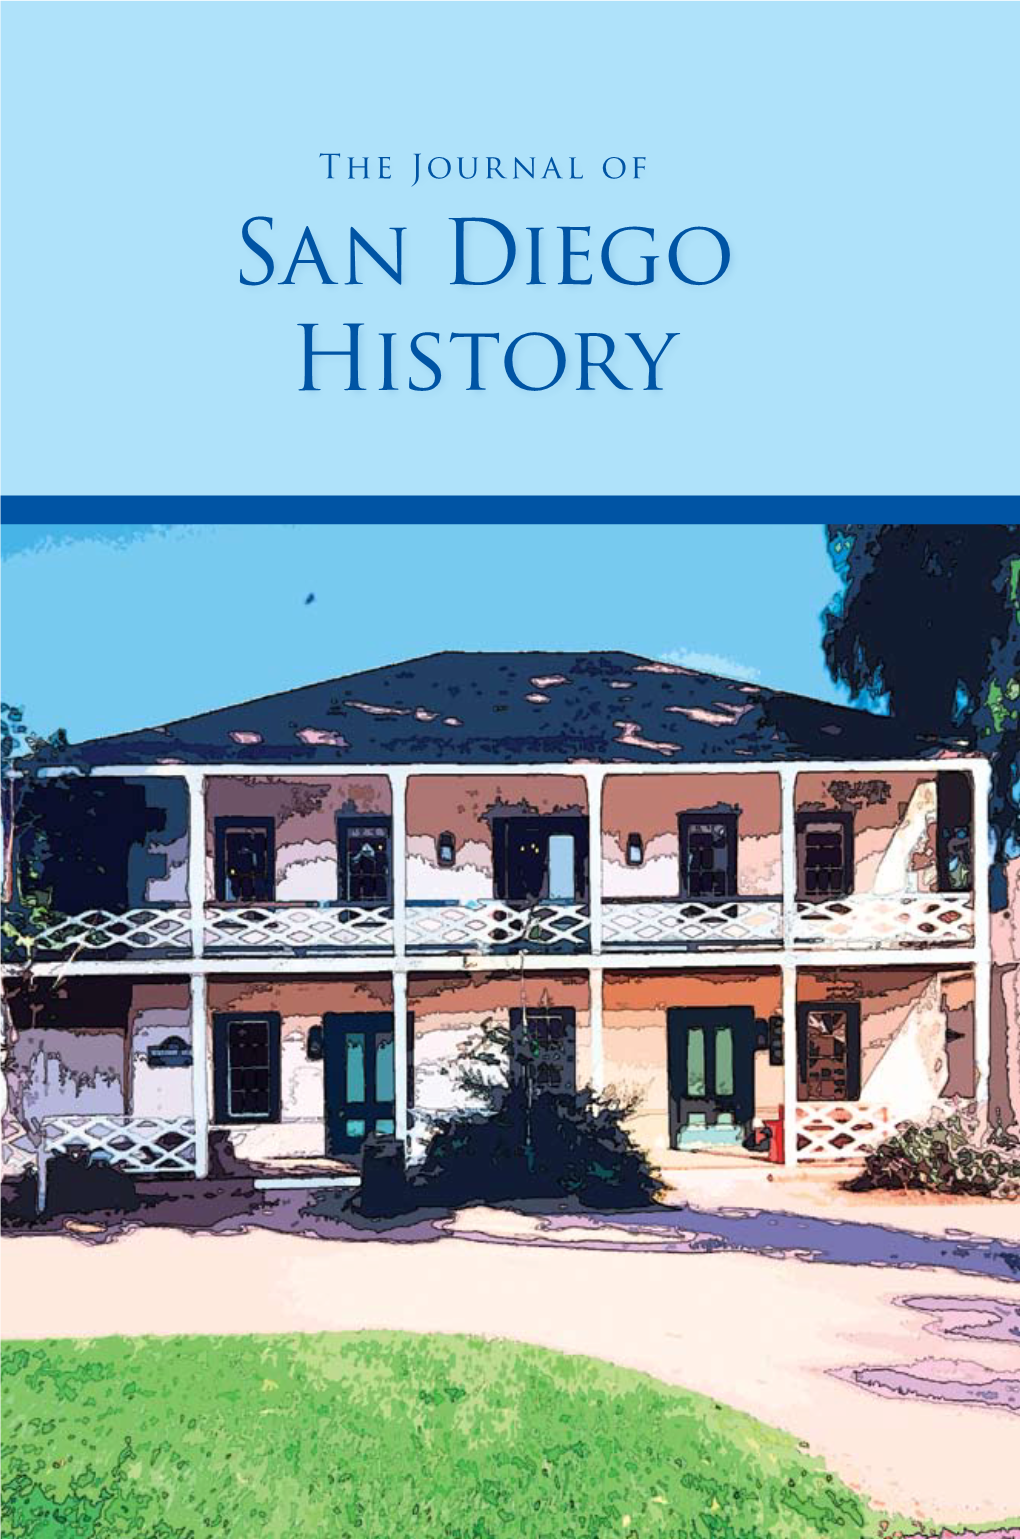 The Journal of San Diego History Vol 53, 2007, Nos 1 & 2